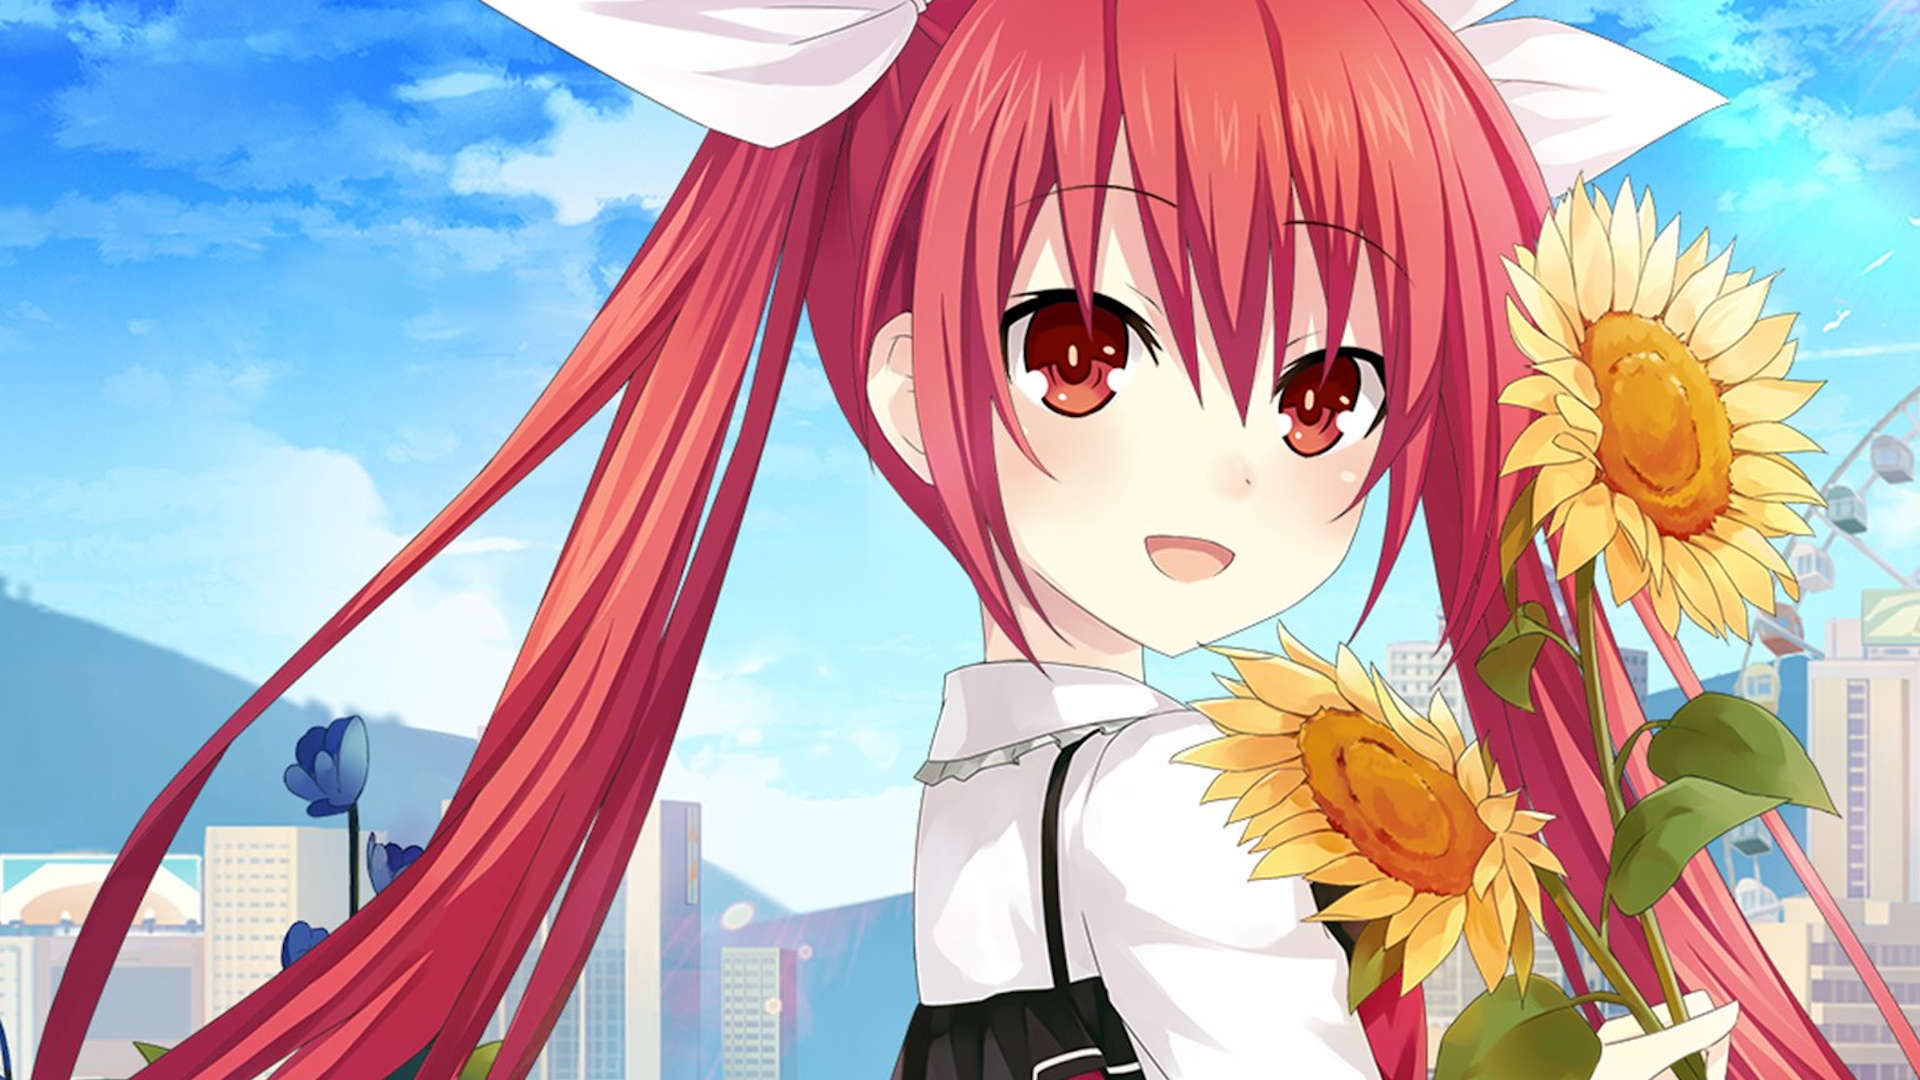 Date a live hd wallpapers, hd images, backgrounds